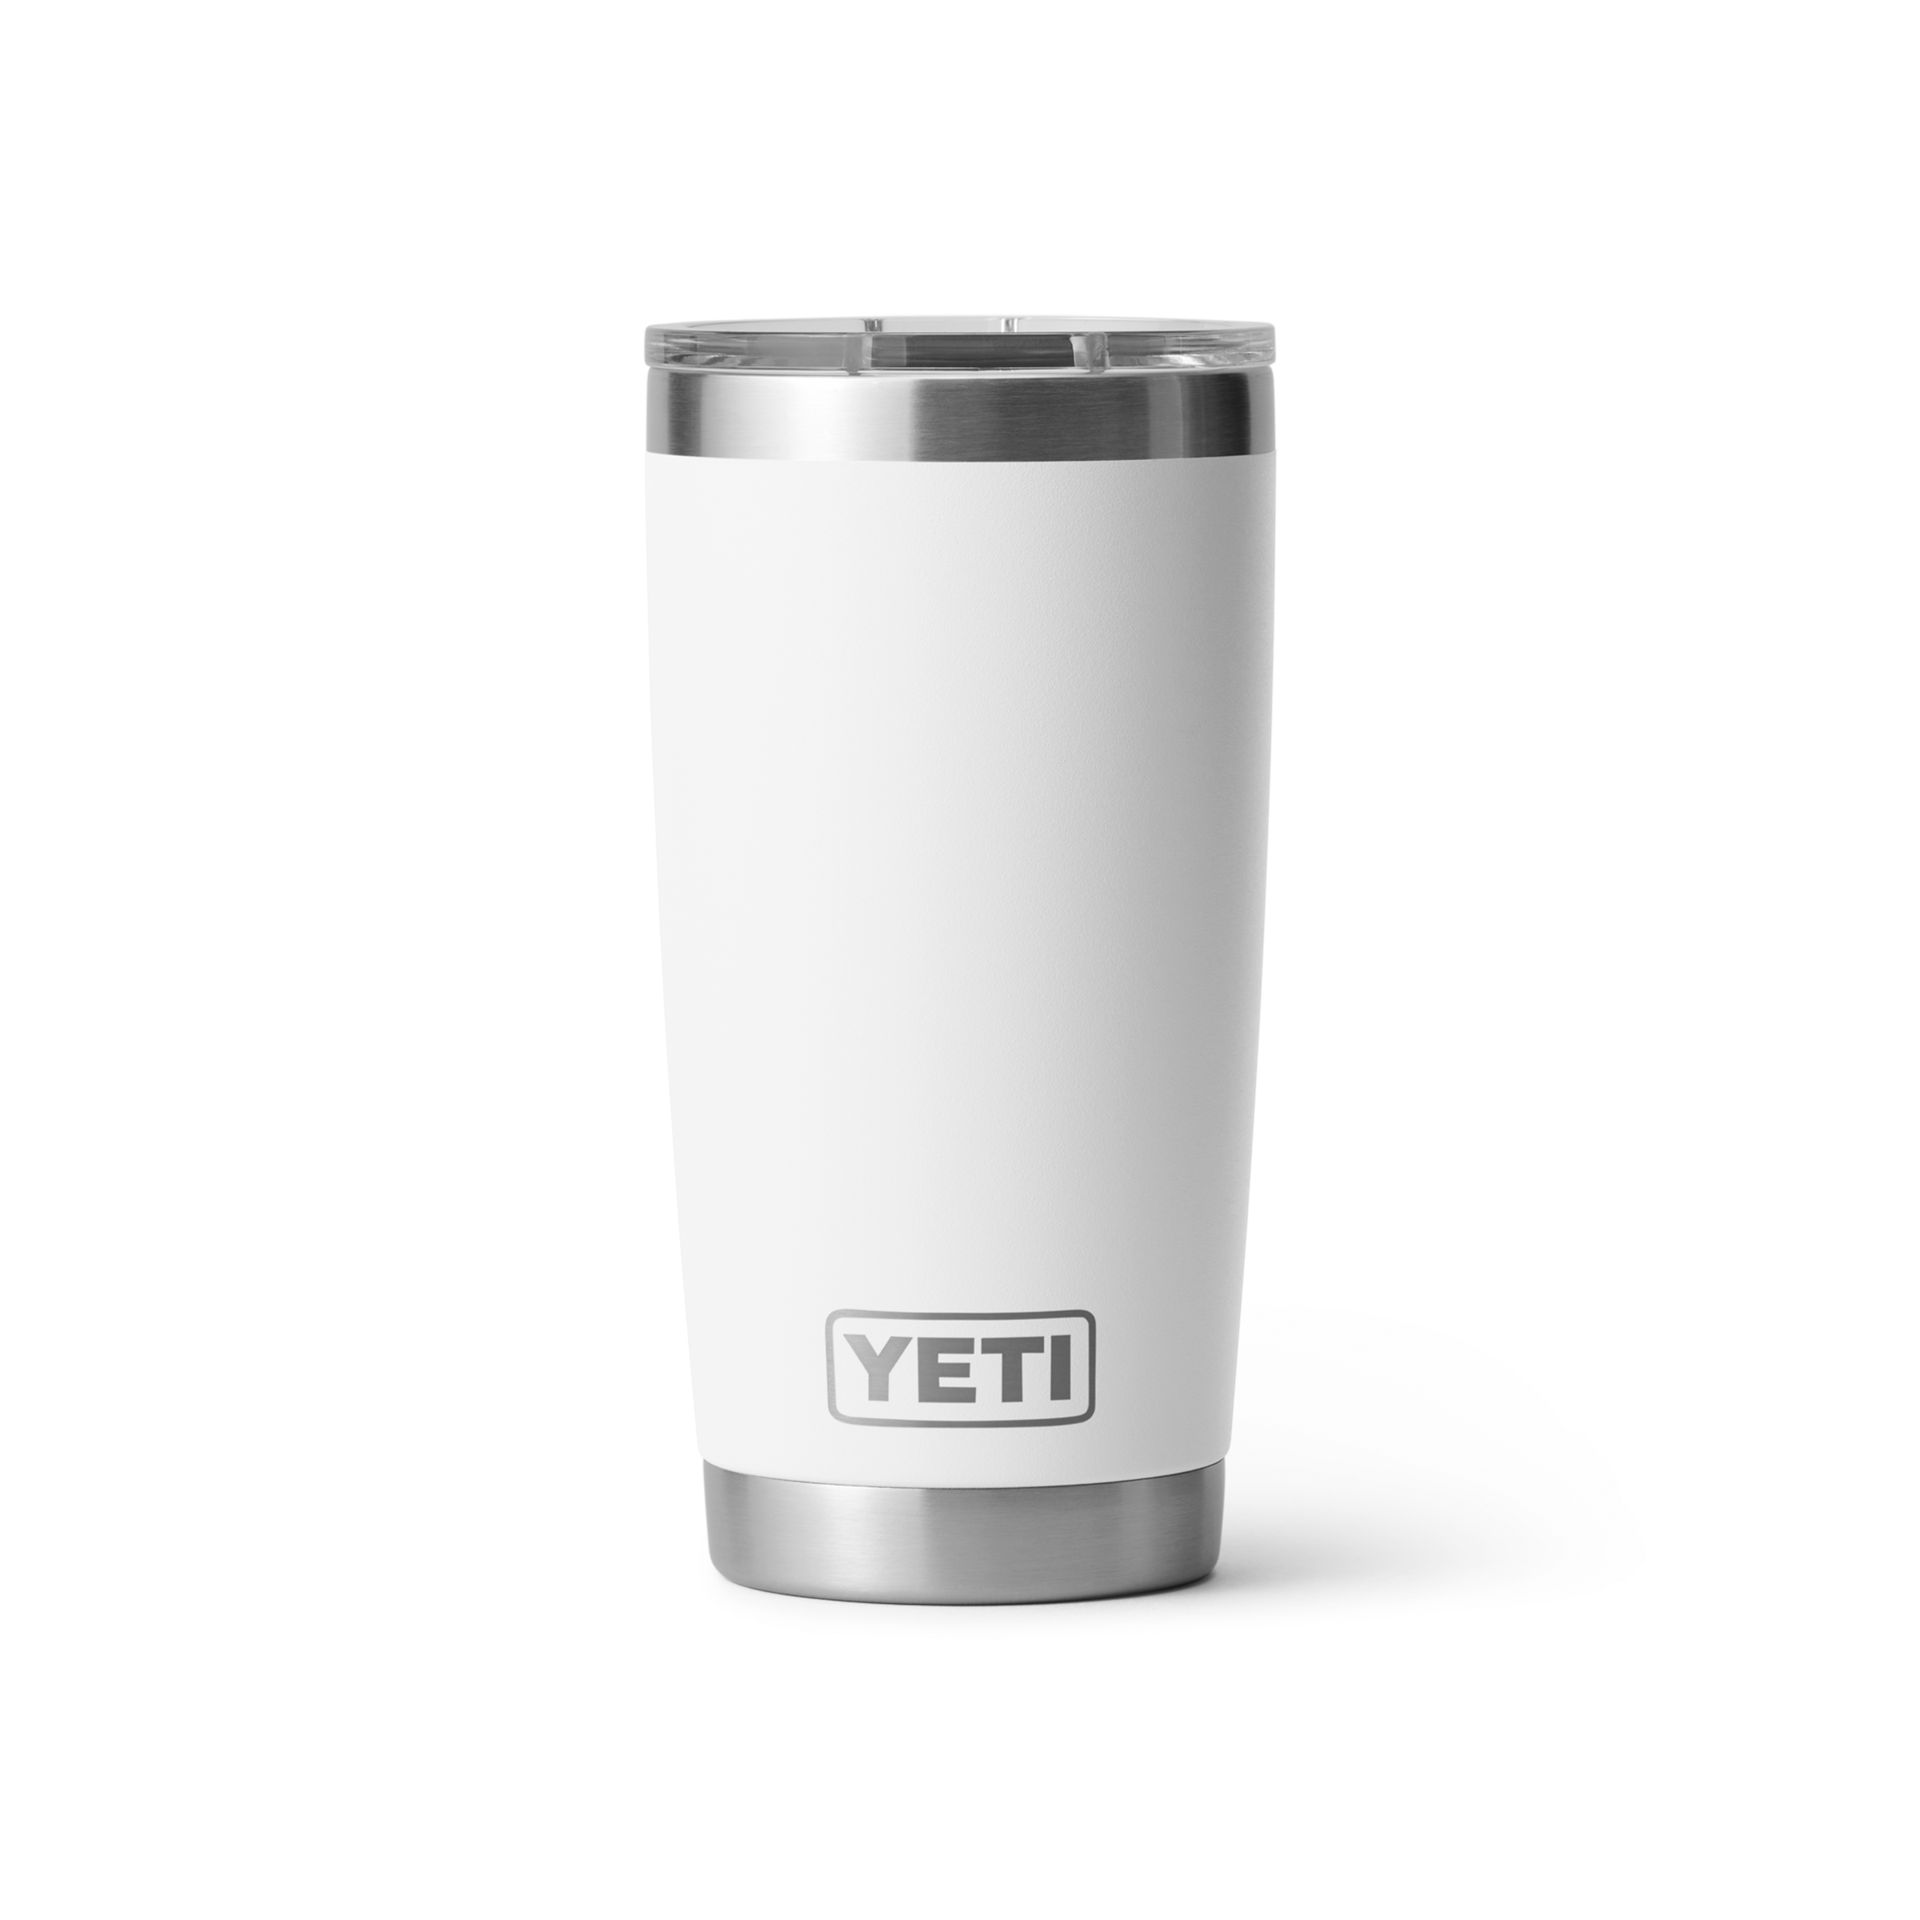 YETI Rambler 20-fl oz Stainless Steel Tumbler with MagSlider Lid, Navy at